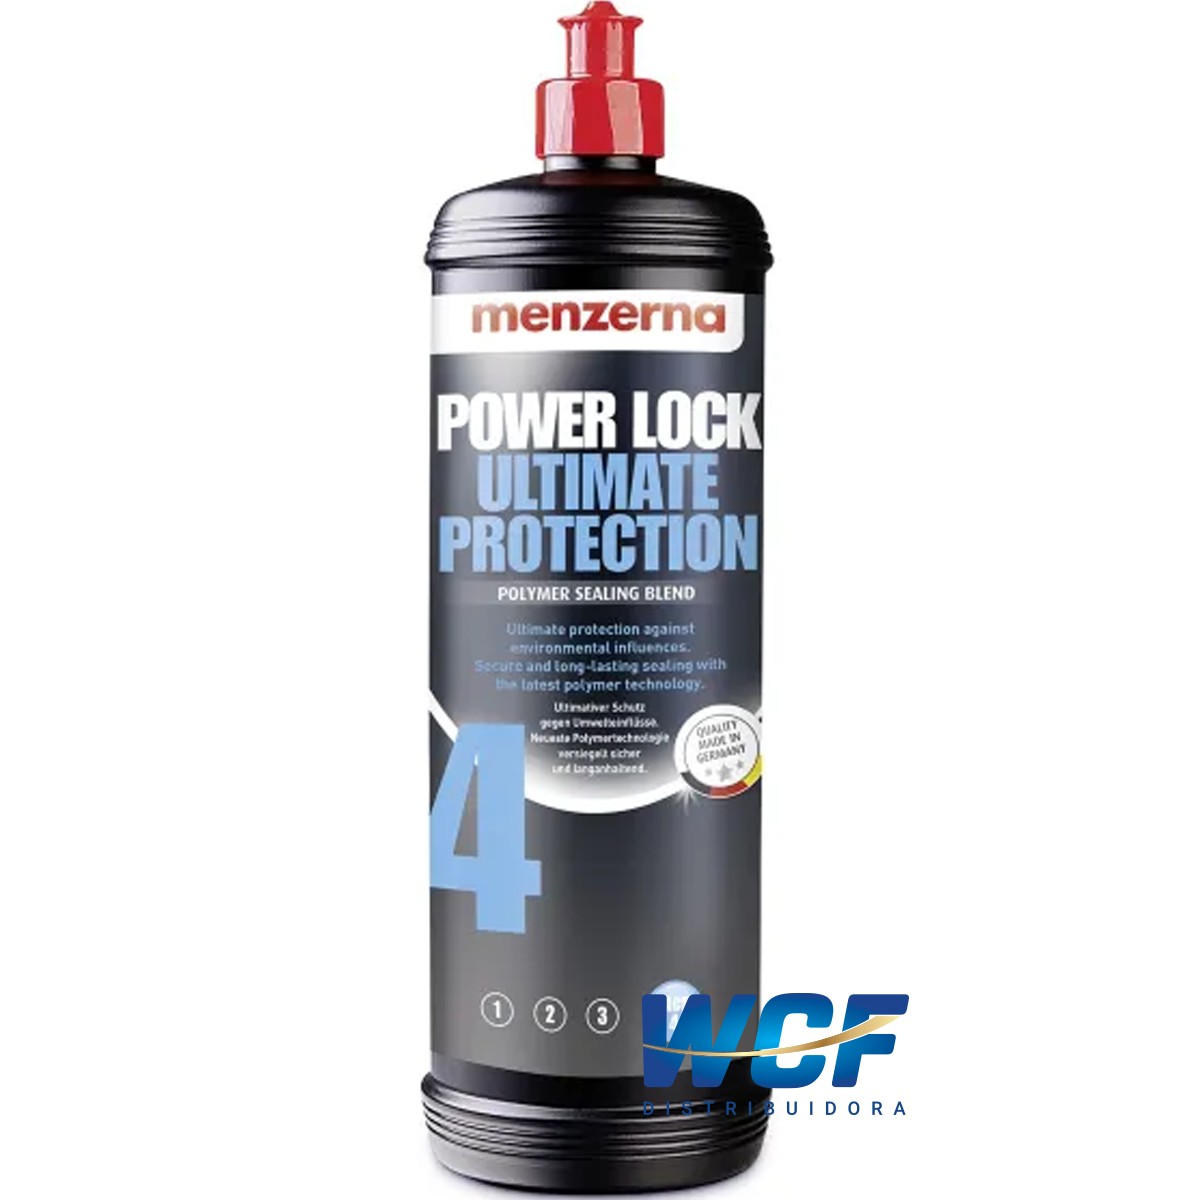 POWER LOCK ULTIMATE PROTECTION 4 1LT MENZERNA